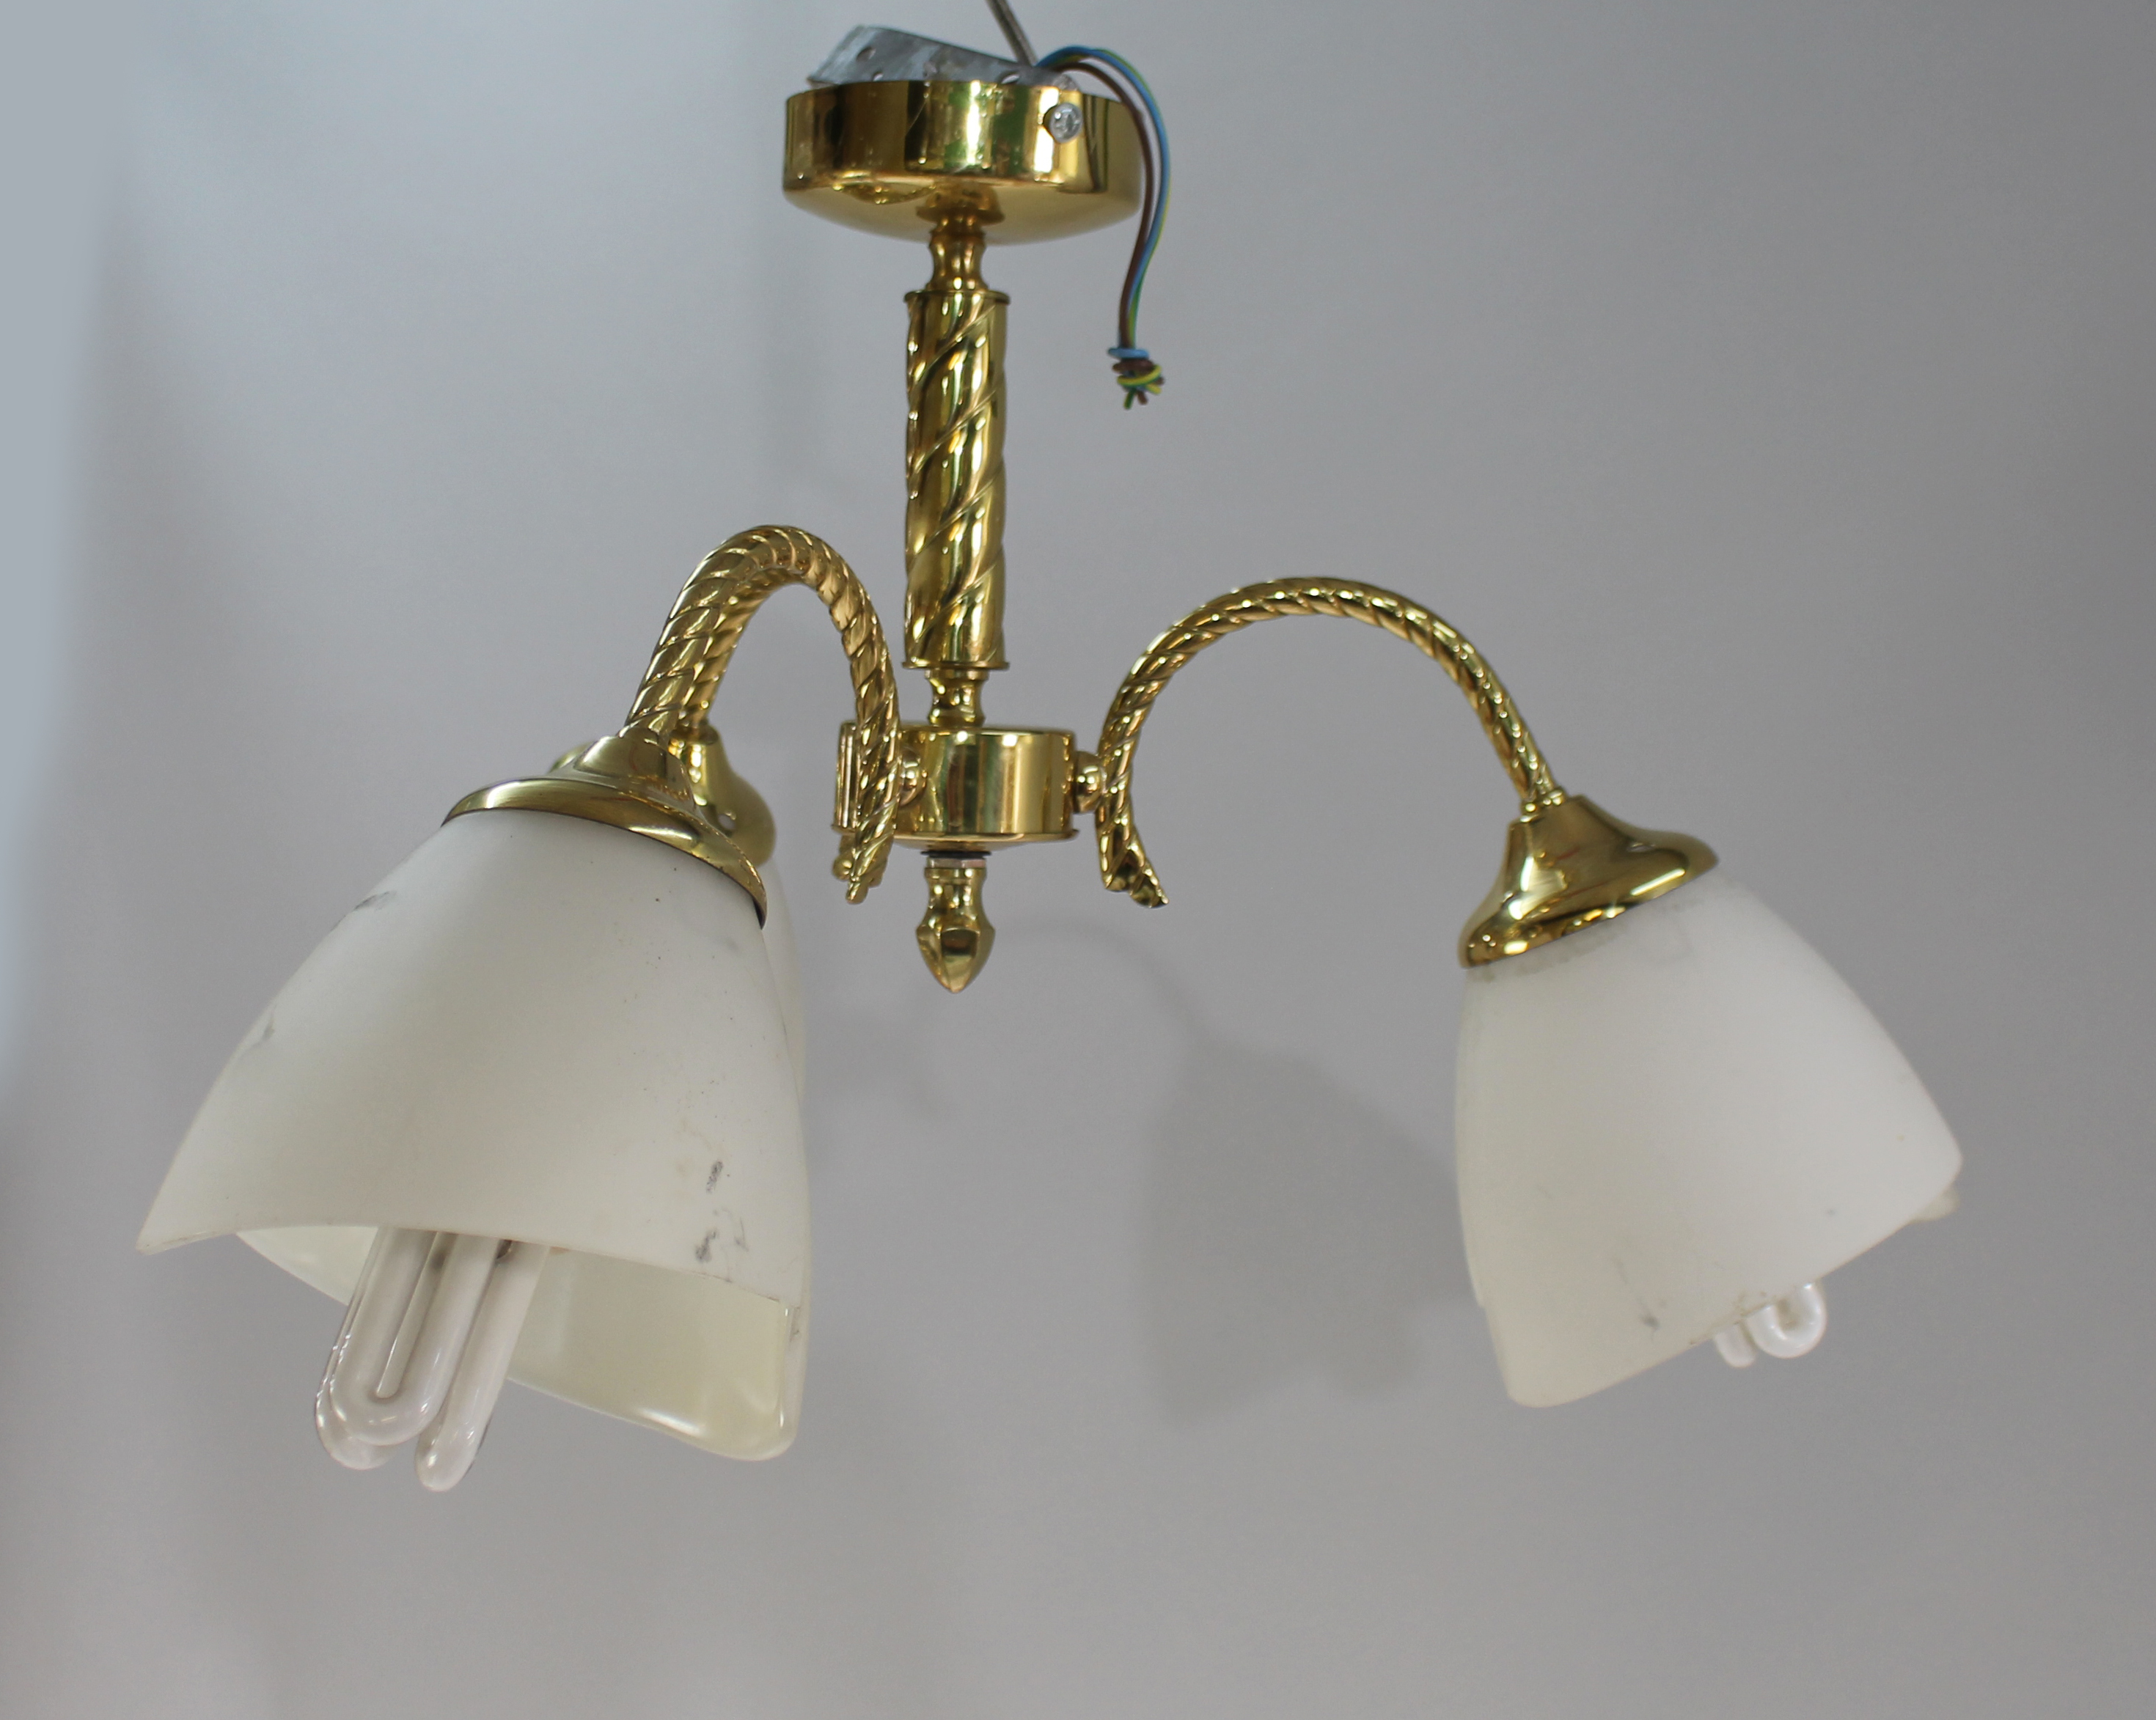 Pair of Three Arm Gold Plated Chandelier with Glass Shades - Image 2 of 2